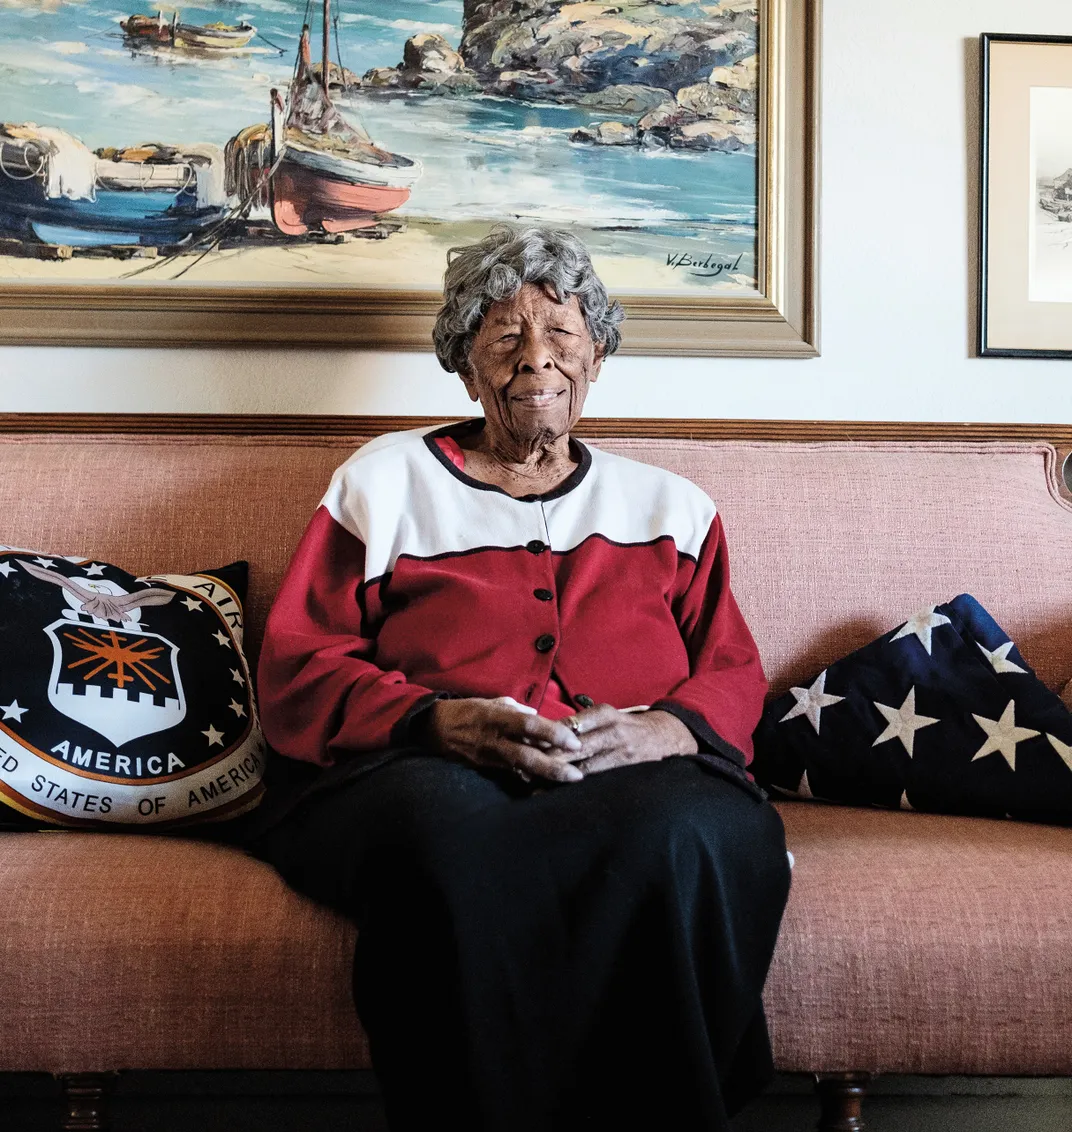 A Black woman sits on a couch surrounded by pillows and art on the wall in her home.